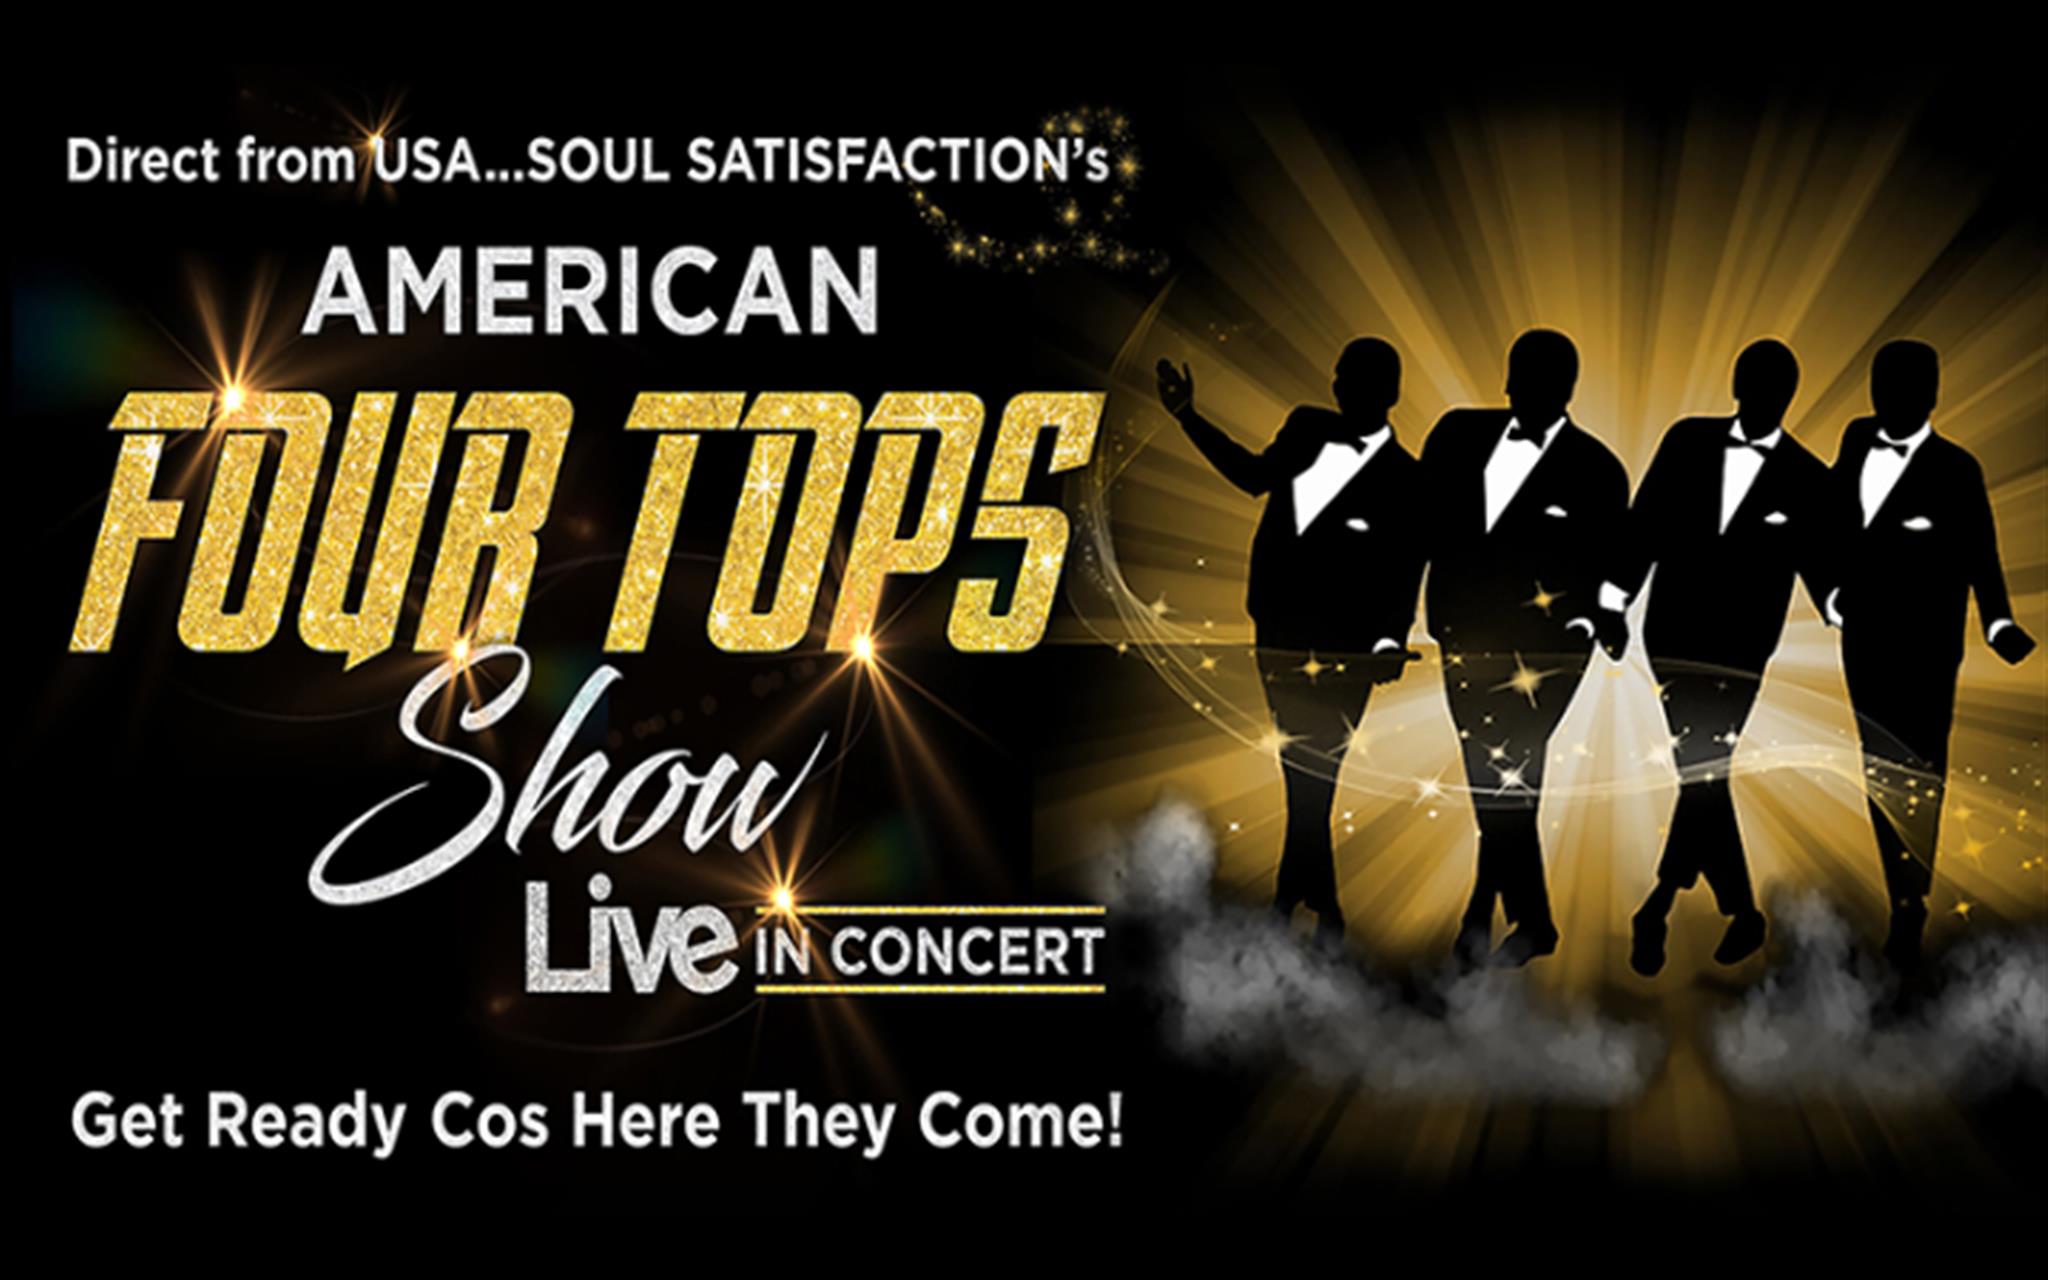 American Four Tops.